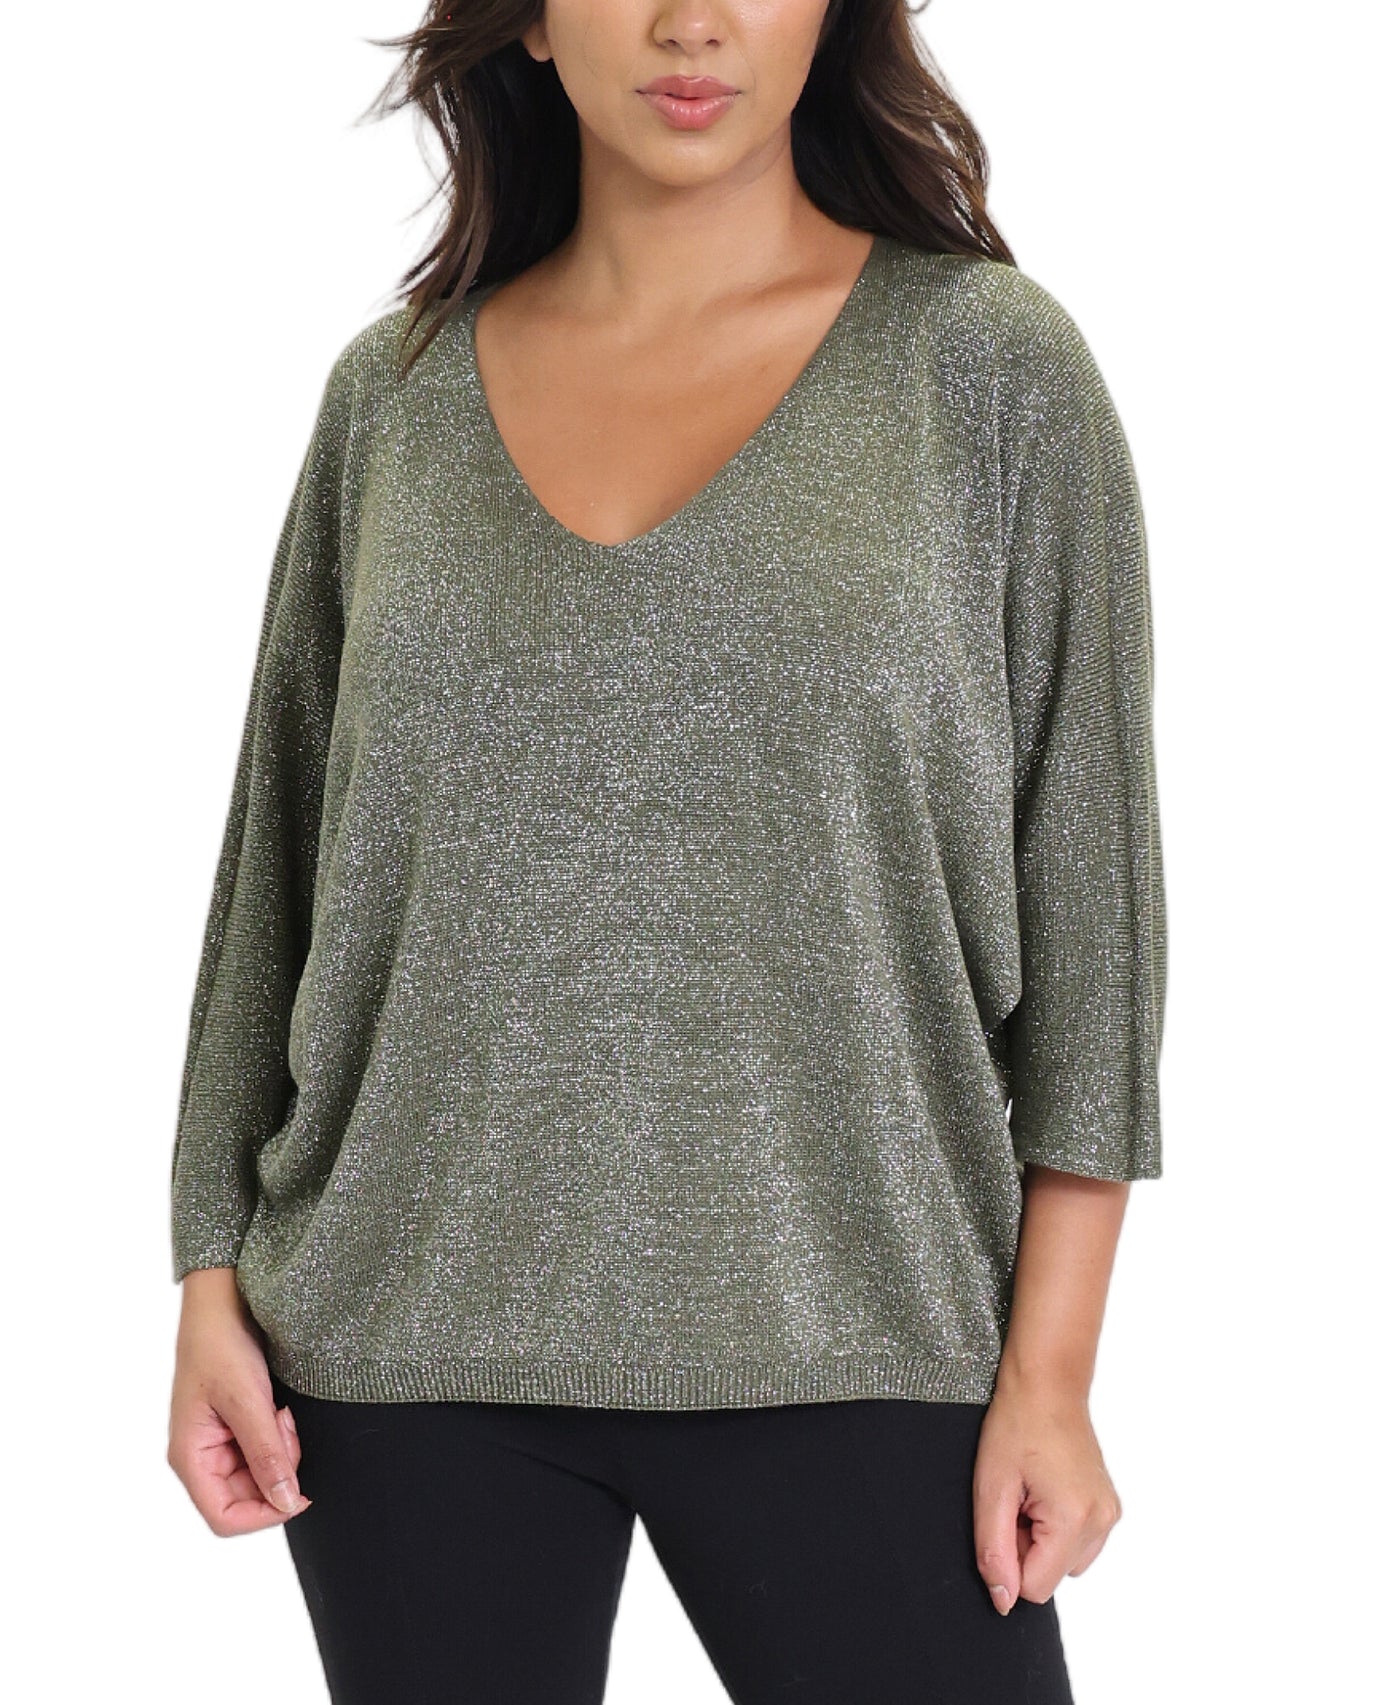 Shimmer Sweater image 1